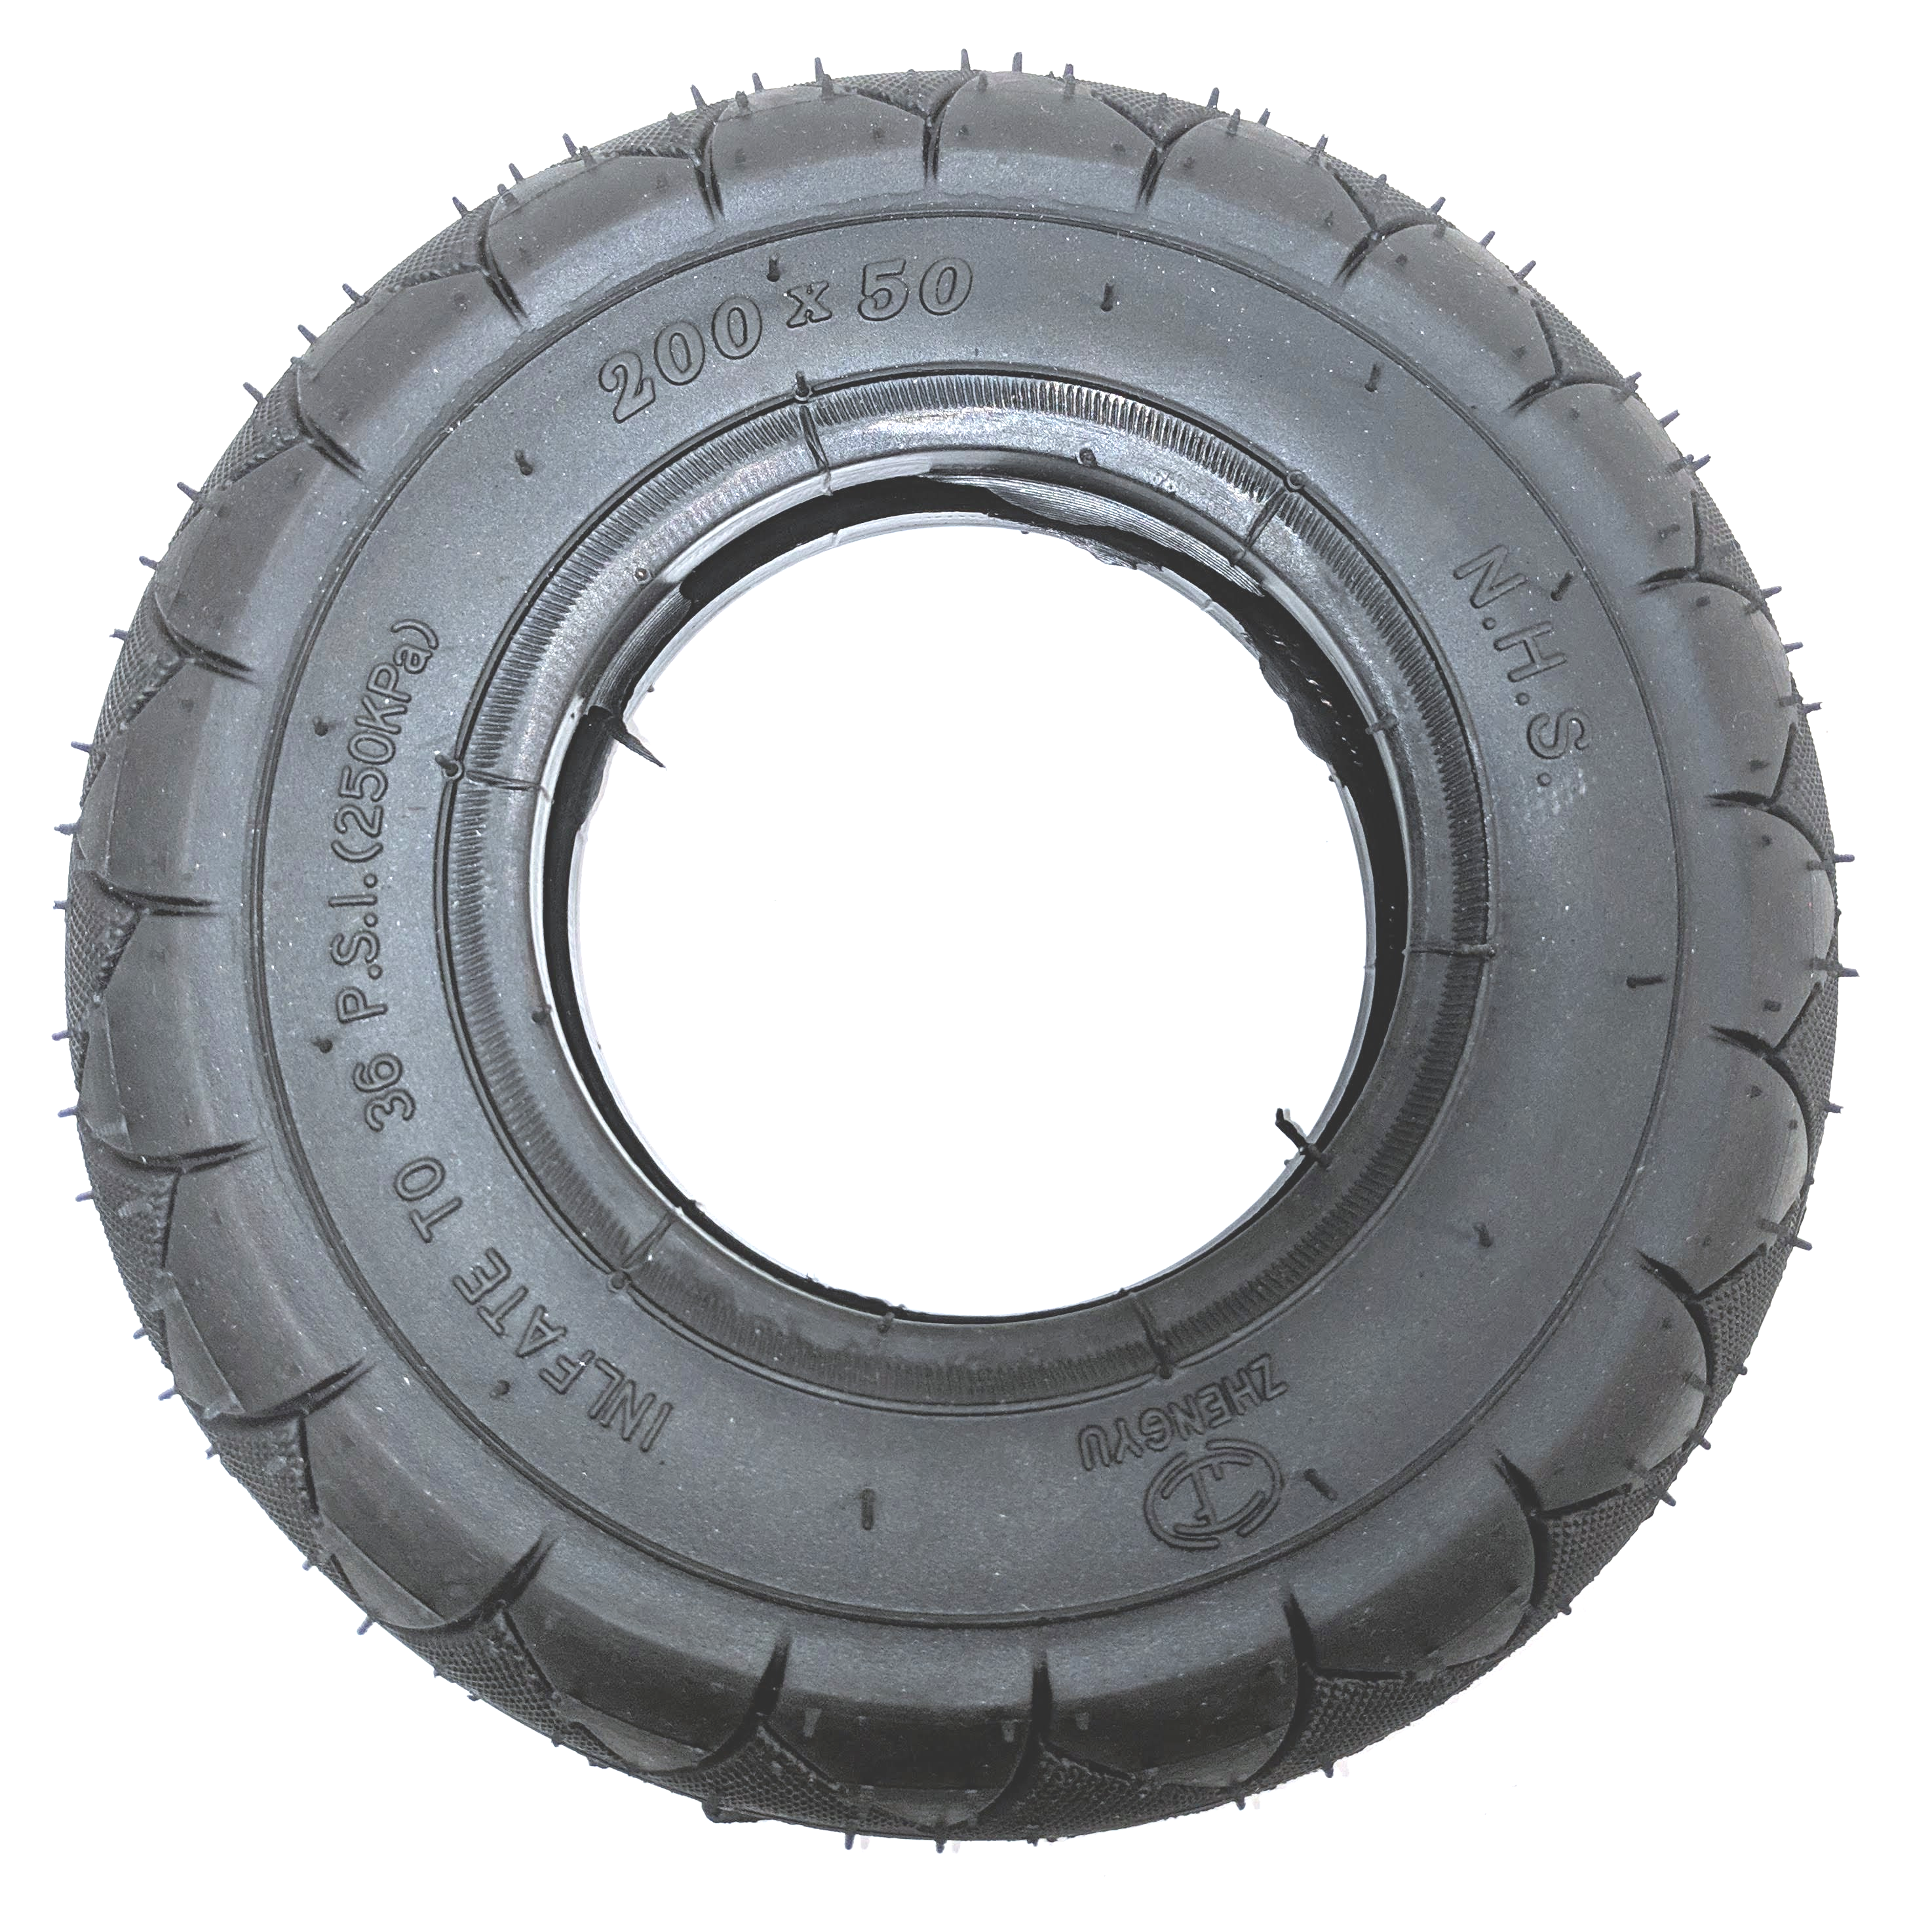 Electric scooter tyre 200x50